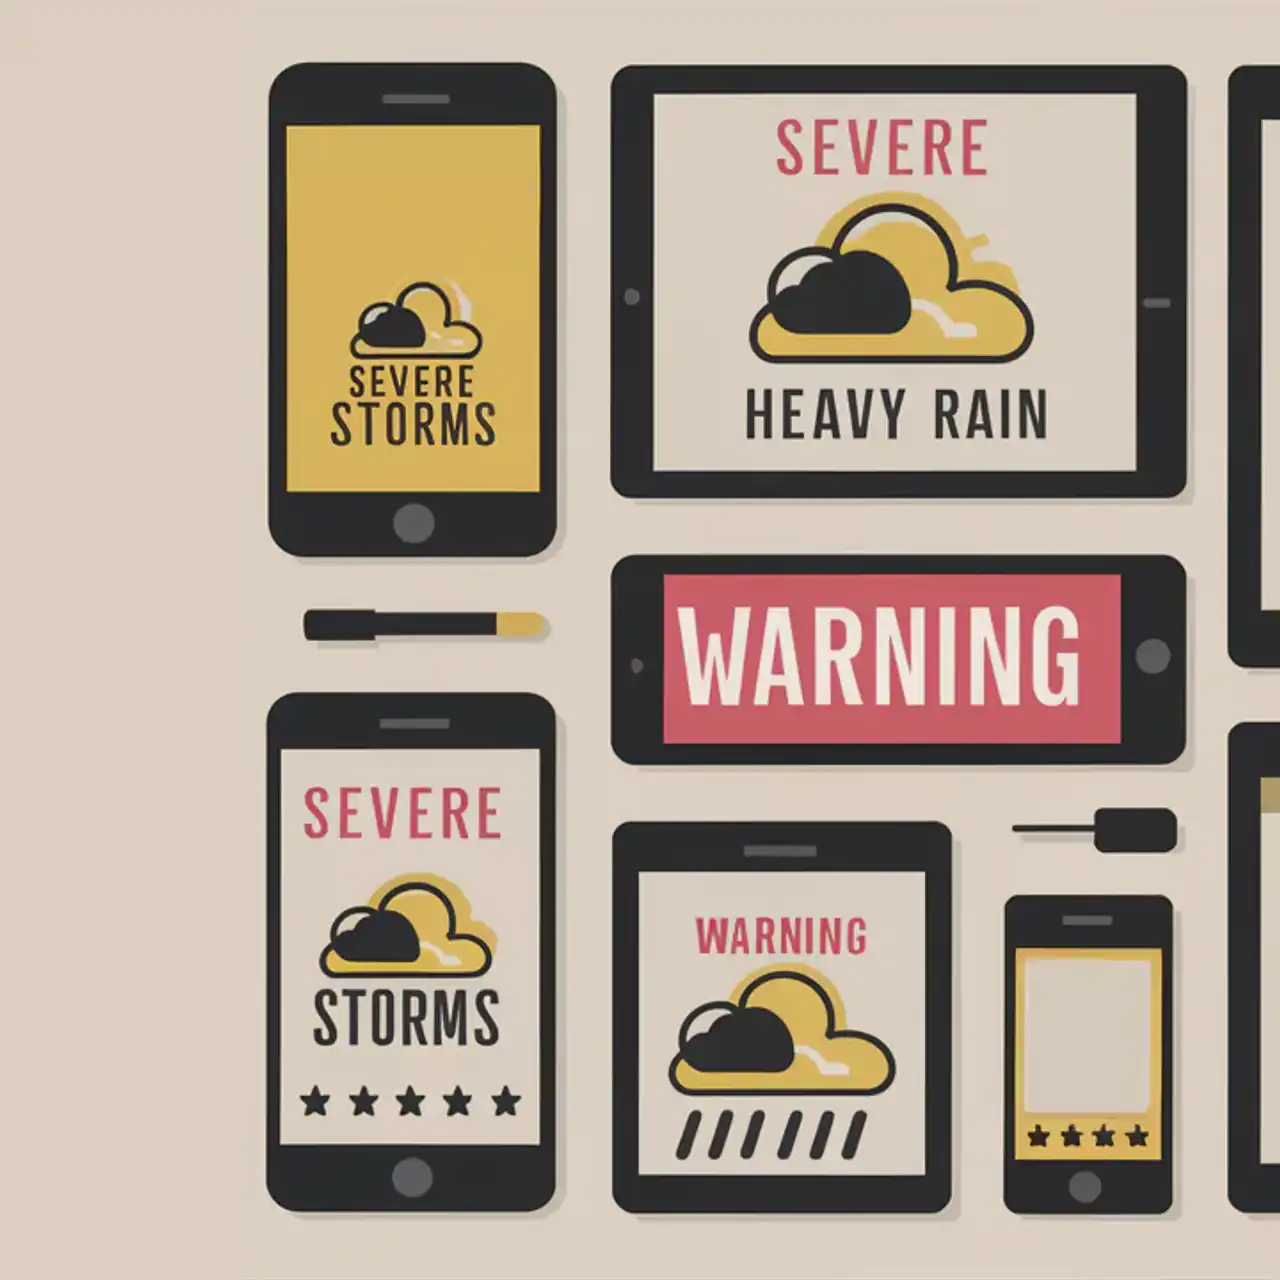 Weather Alert Apps: Your Personal Guardian Against Mother Nature's Mood Swings